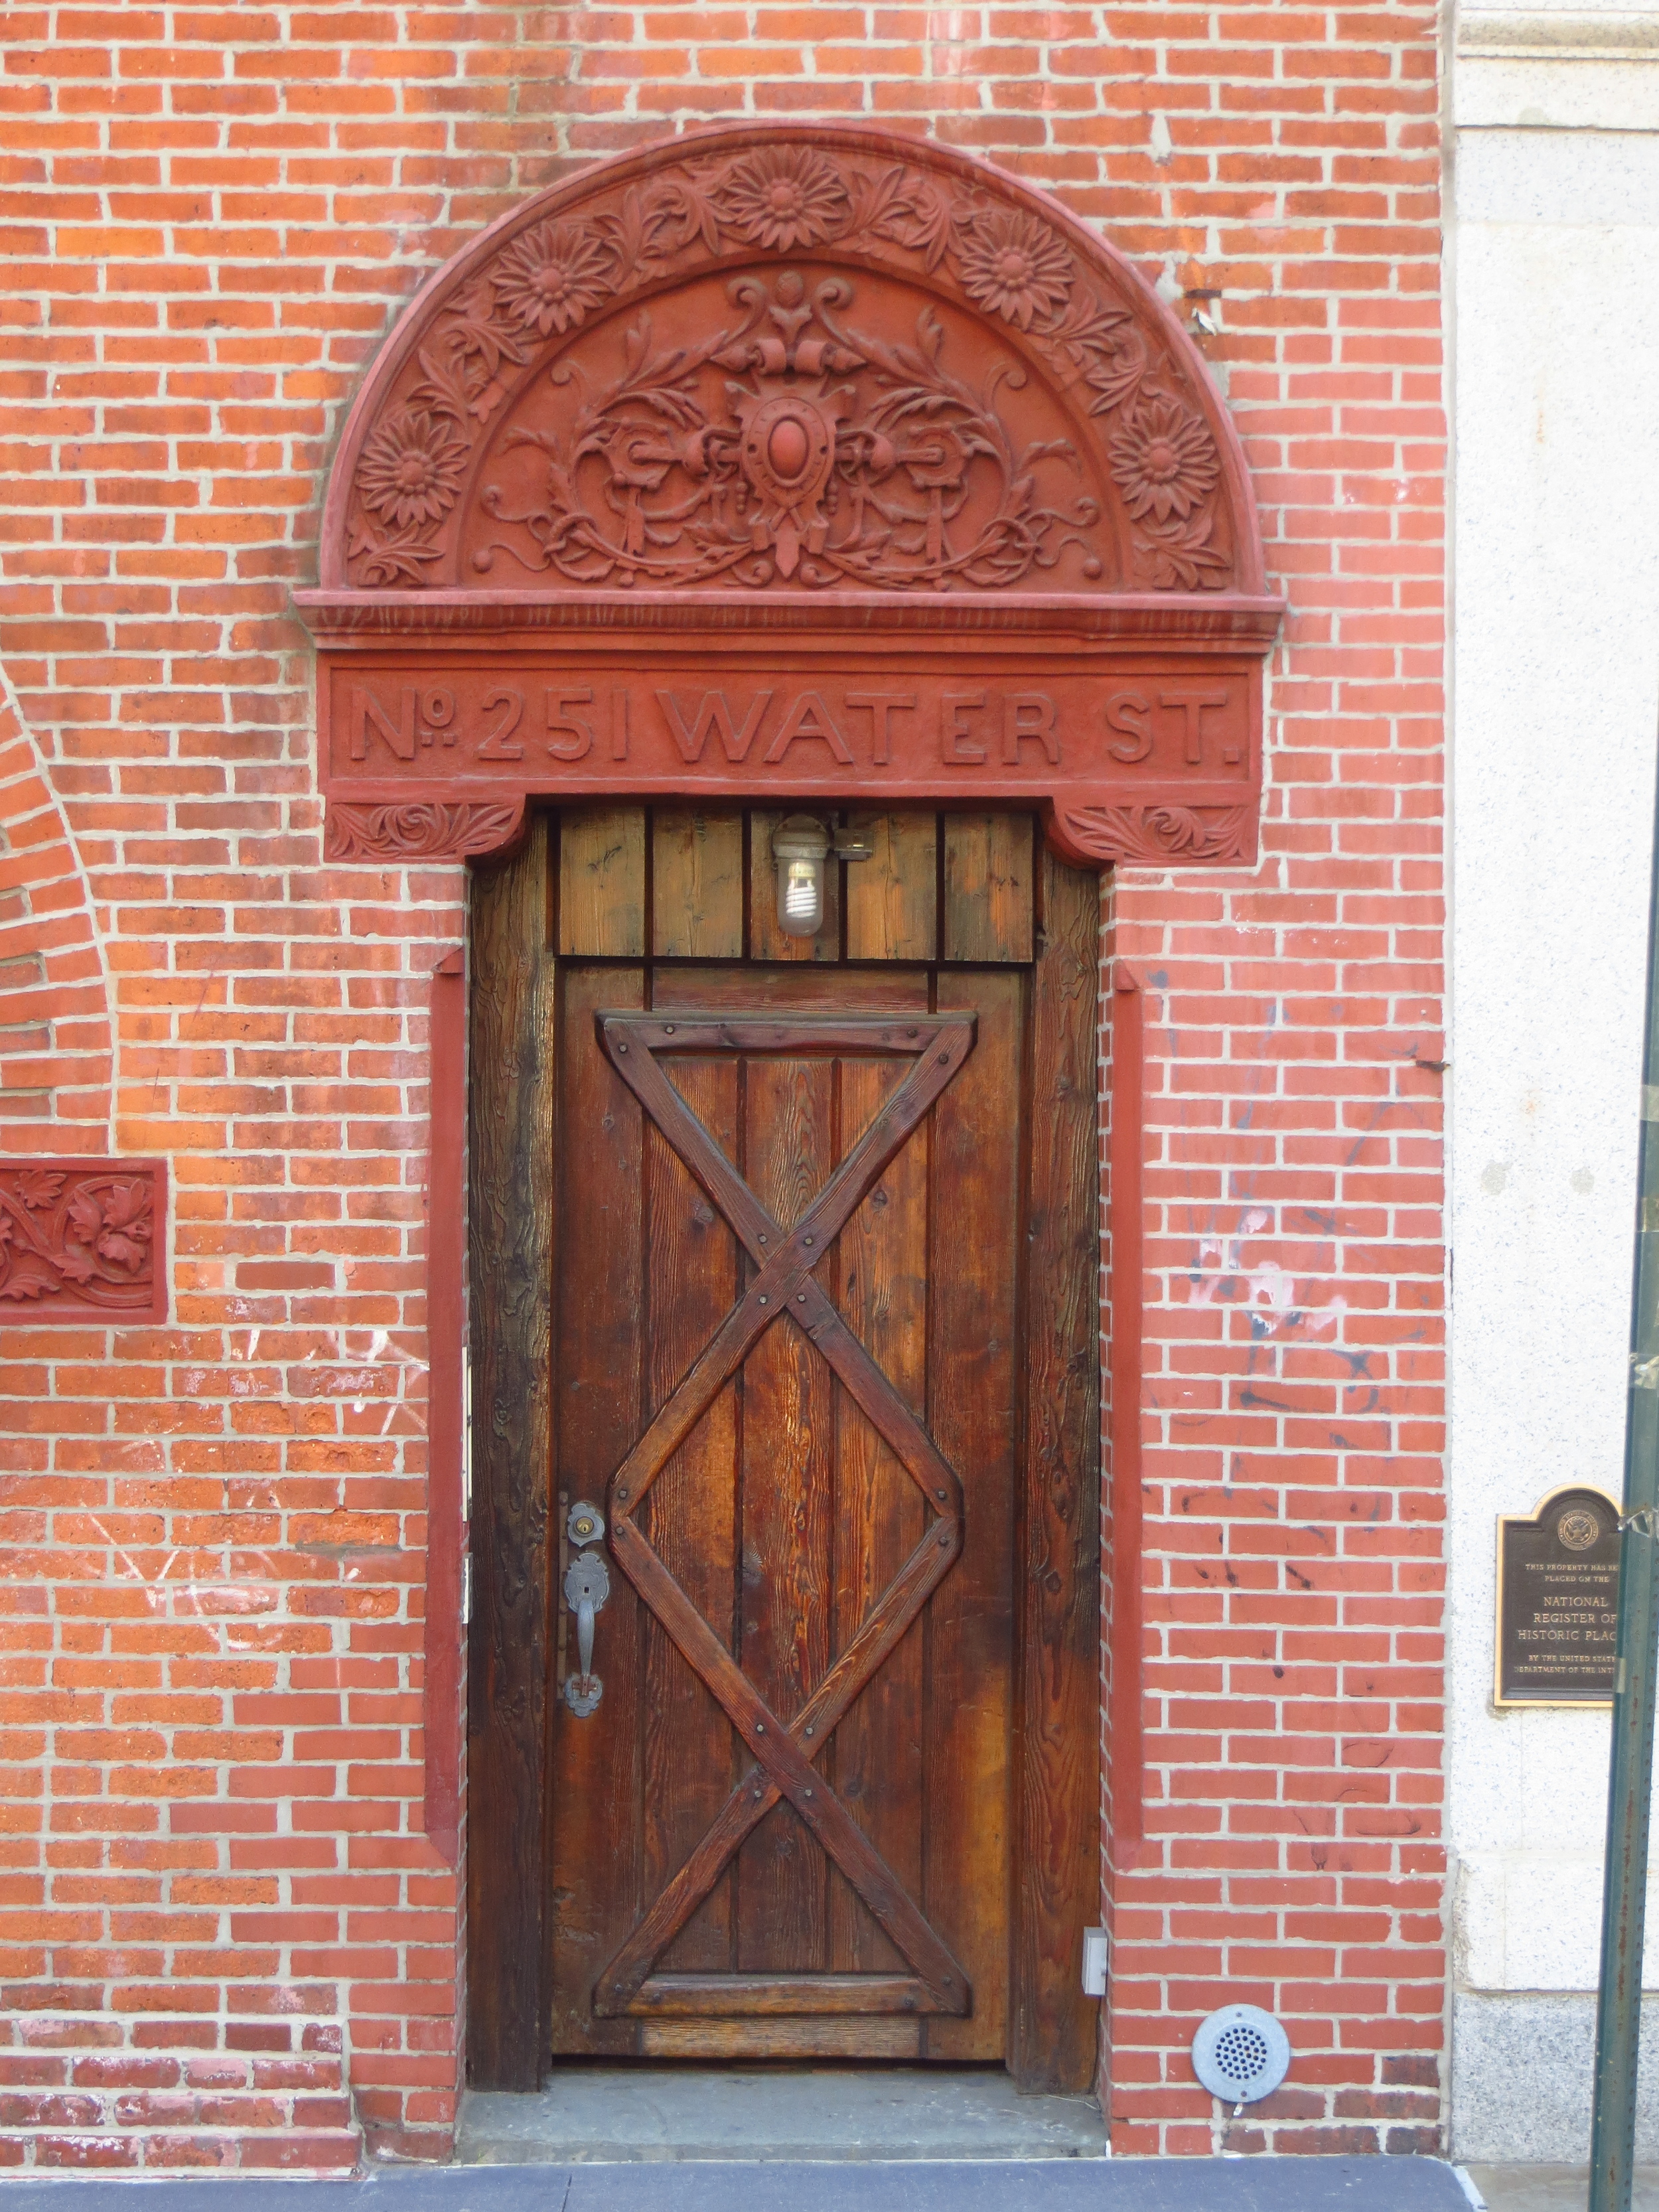 Cool old door on cool old building